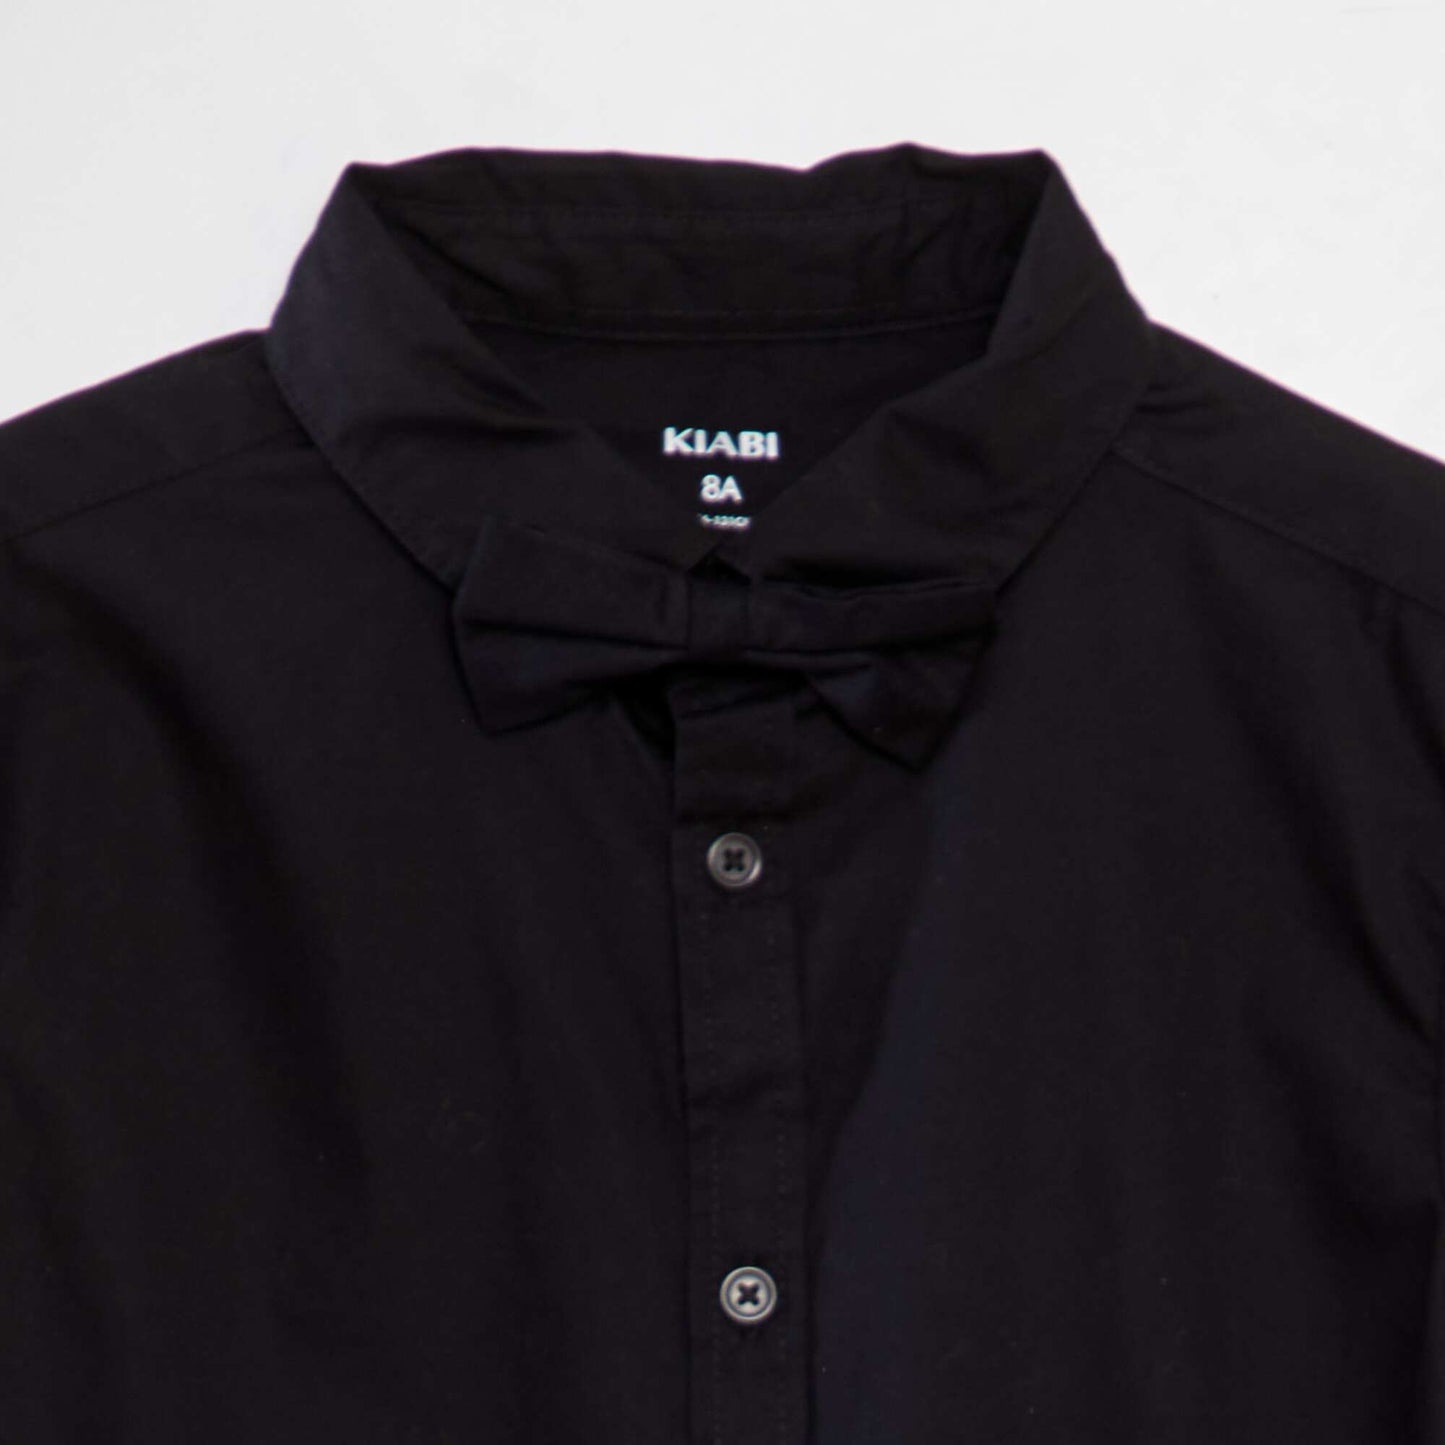 Short-sleeved shirt with bow tie black